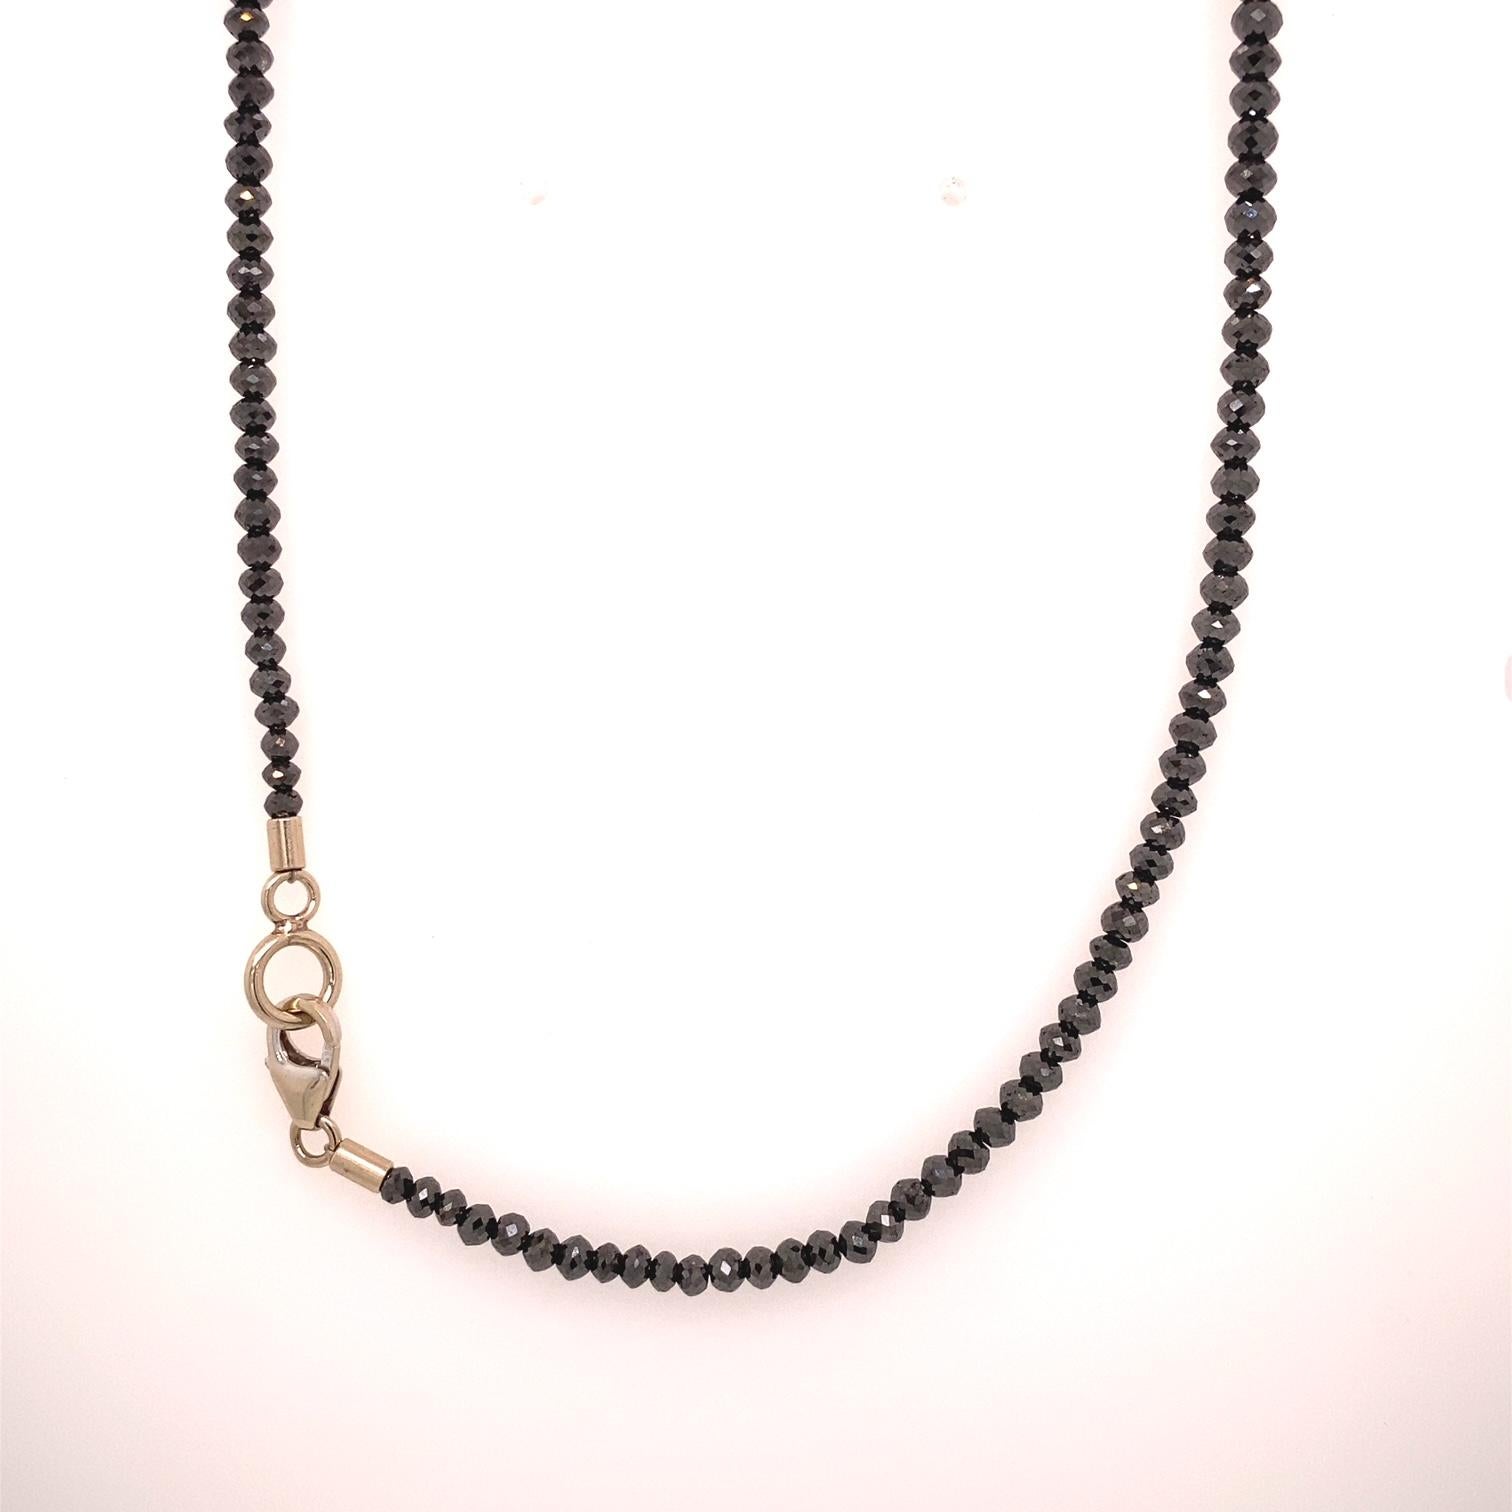 A 30.94 carat faceted black diamond necklace with a 14k white gold clasp. This necklace was made and designed by llyn strong.